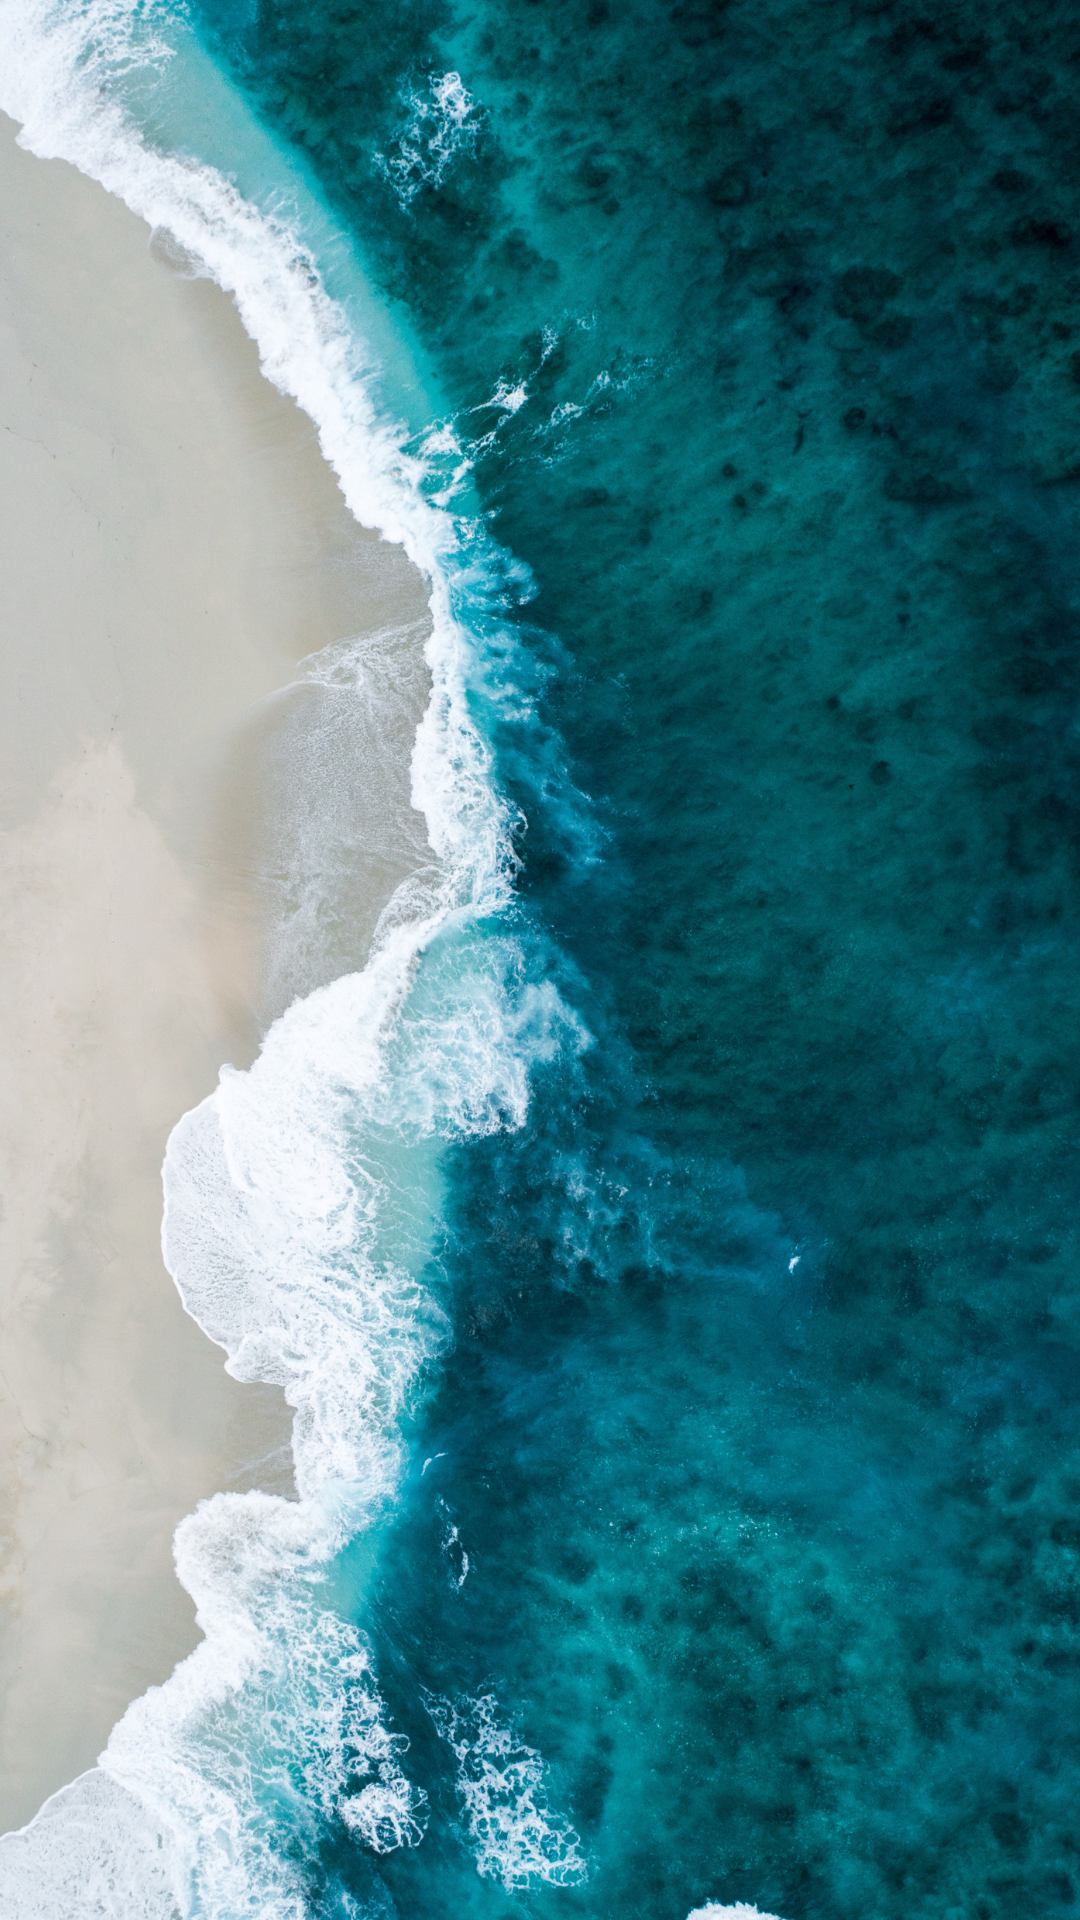 artistic wallpapers for android,water,wave,blue,aqua,turquoise